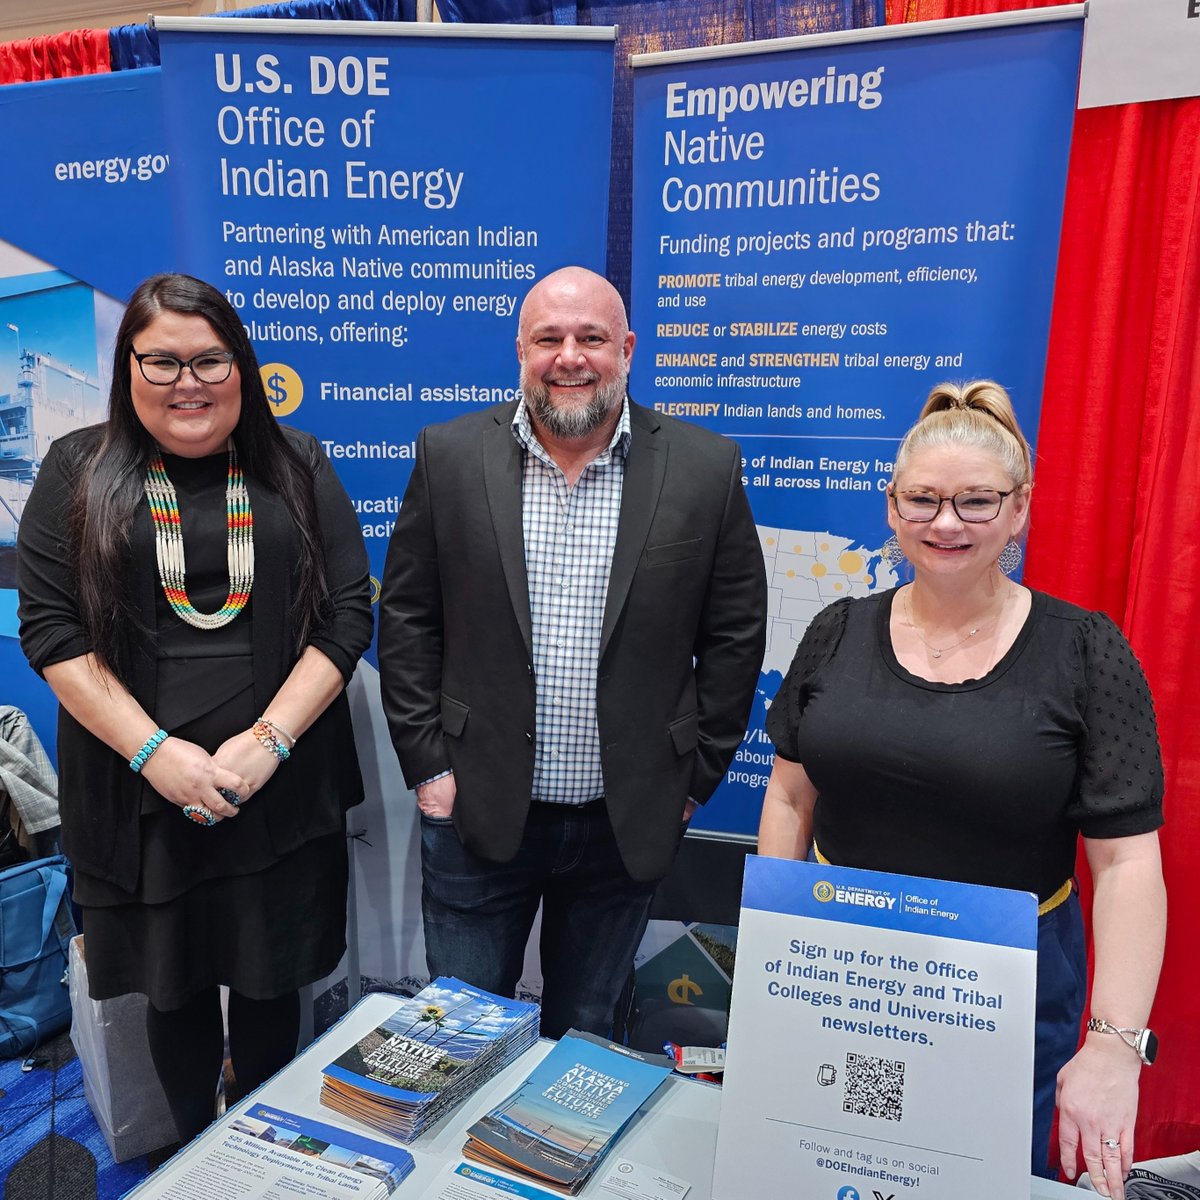 We're having a great time at the @ncaied 2024 Reservation Economic Summit in Las Vegas this week! #RES2024 Our Office of Indian Energy team members are here alongside many others from @ENERGY! Please stop by our booth #734 and say hello! 👋🏾